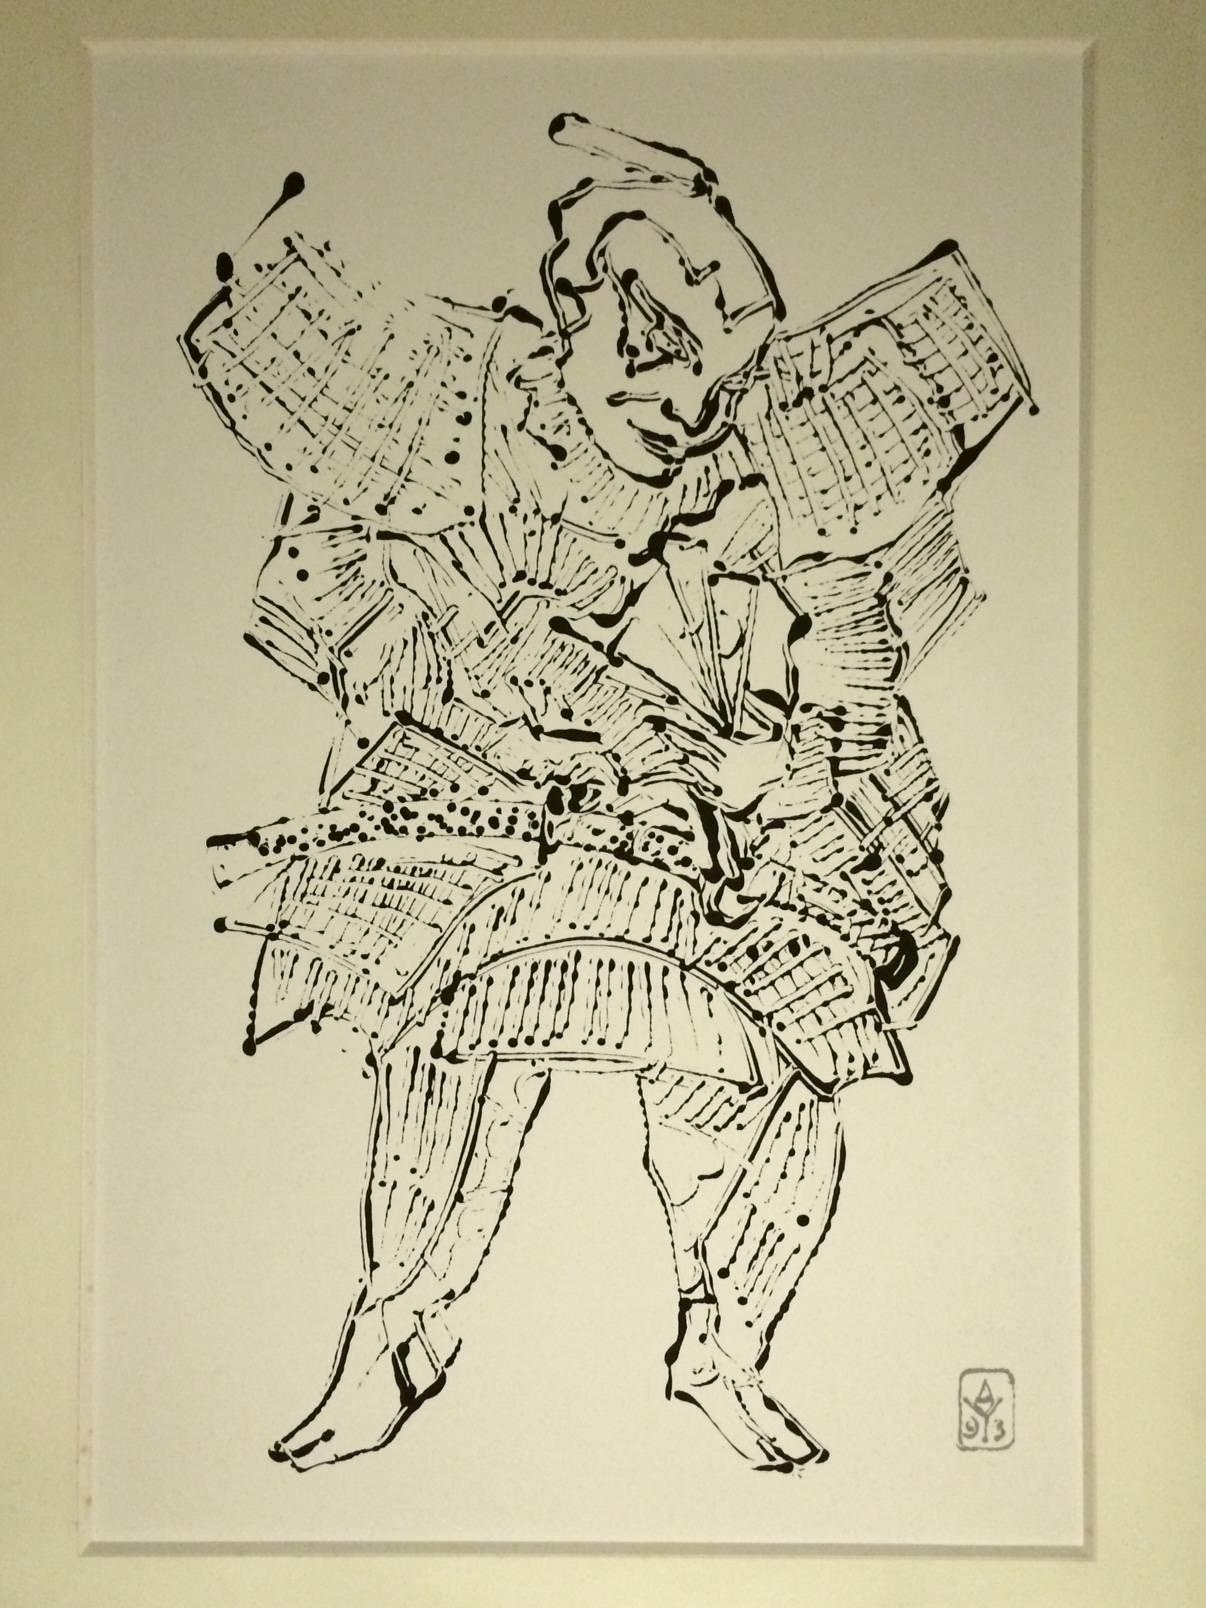 A large painting by renowned French Artist Alain Le Yaouanc (1940).
one: Titled Monotype Samourai ,Ink on heavy paper with original frame in heavy paper
Signed and dated 93 with